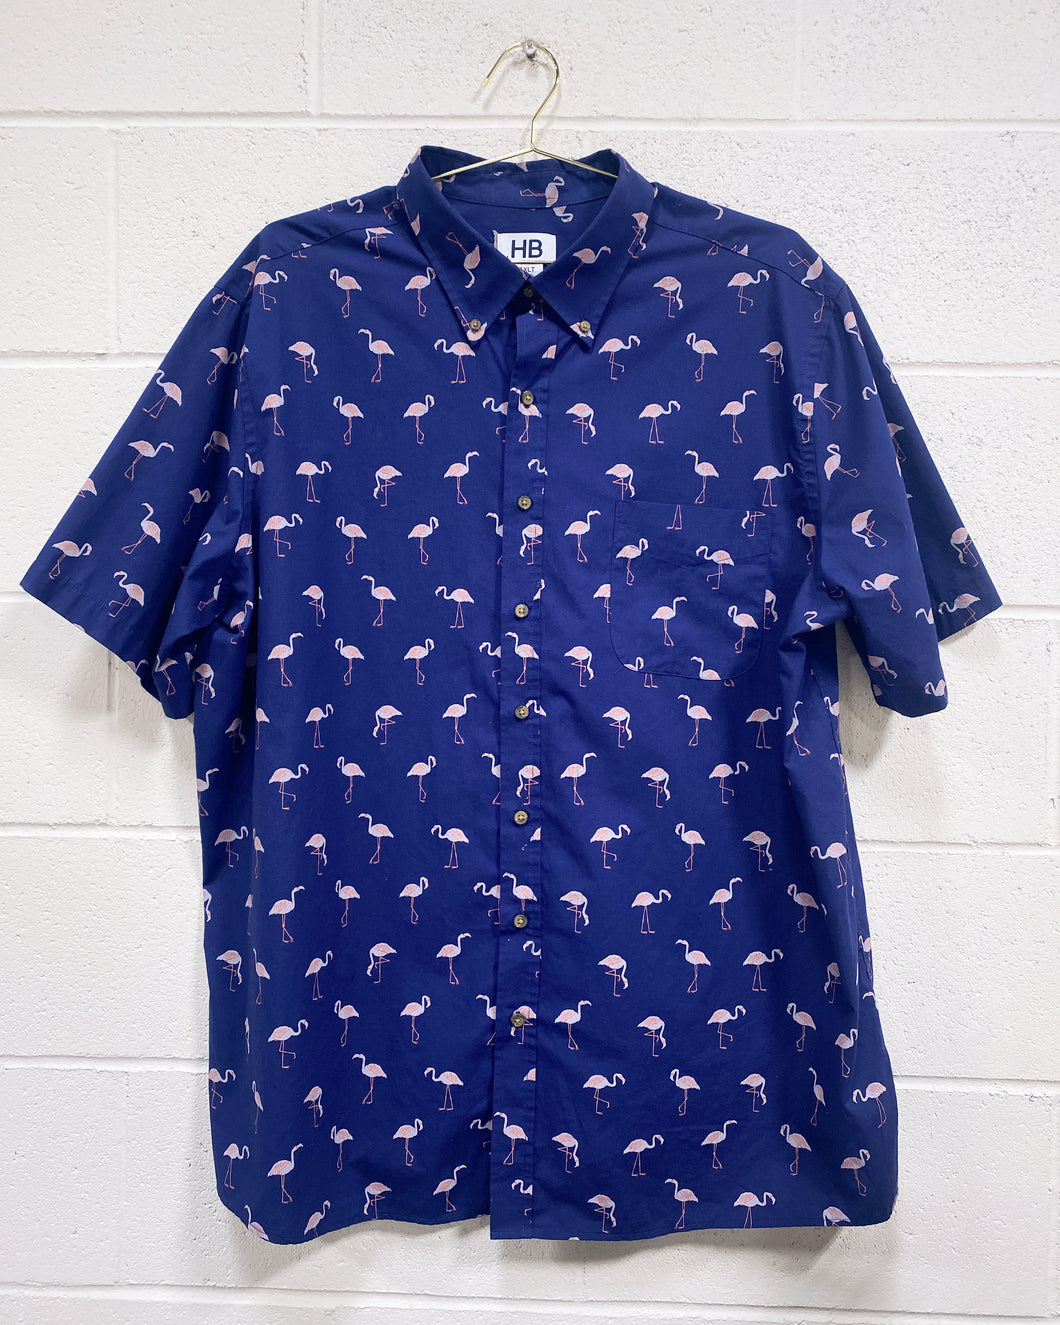 Navy Blue and Pink Flamingo Button Up (1XLT)